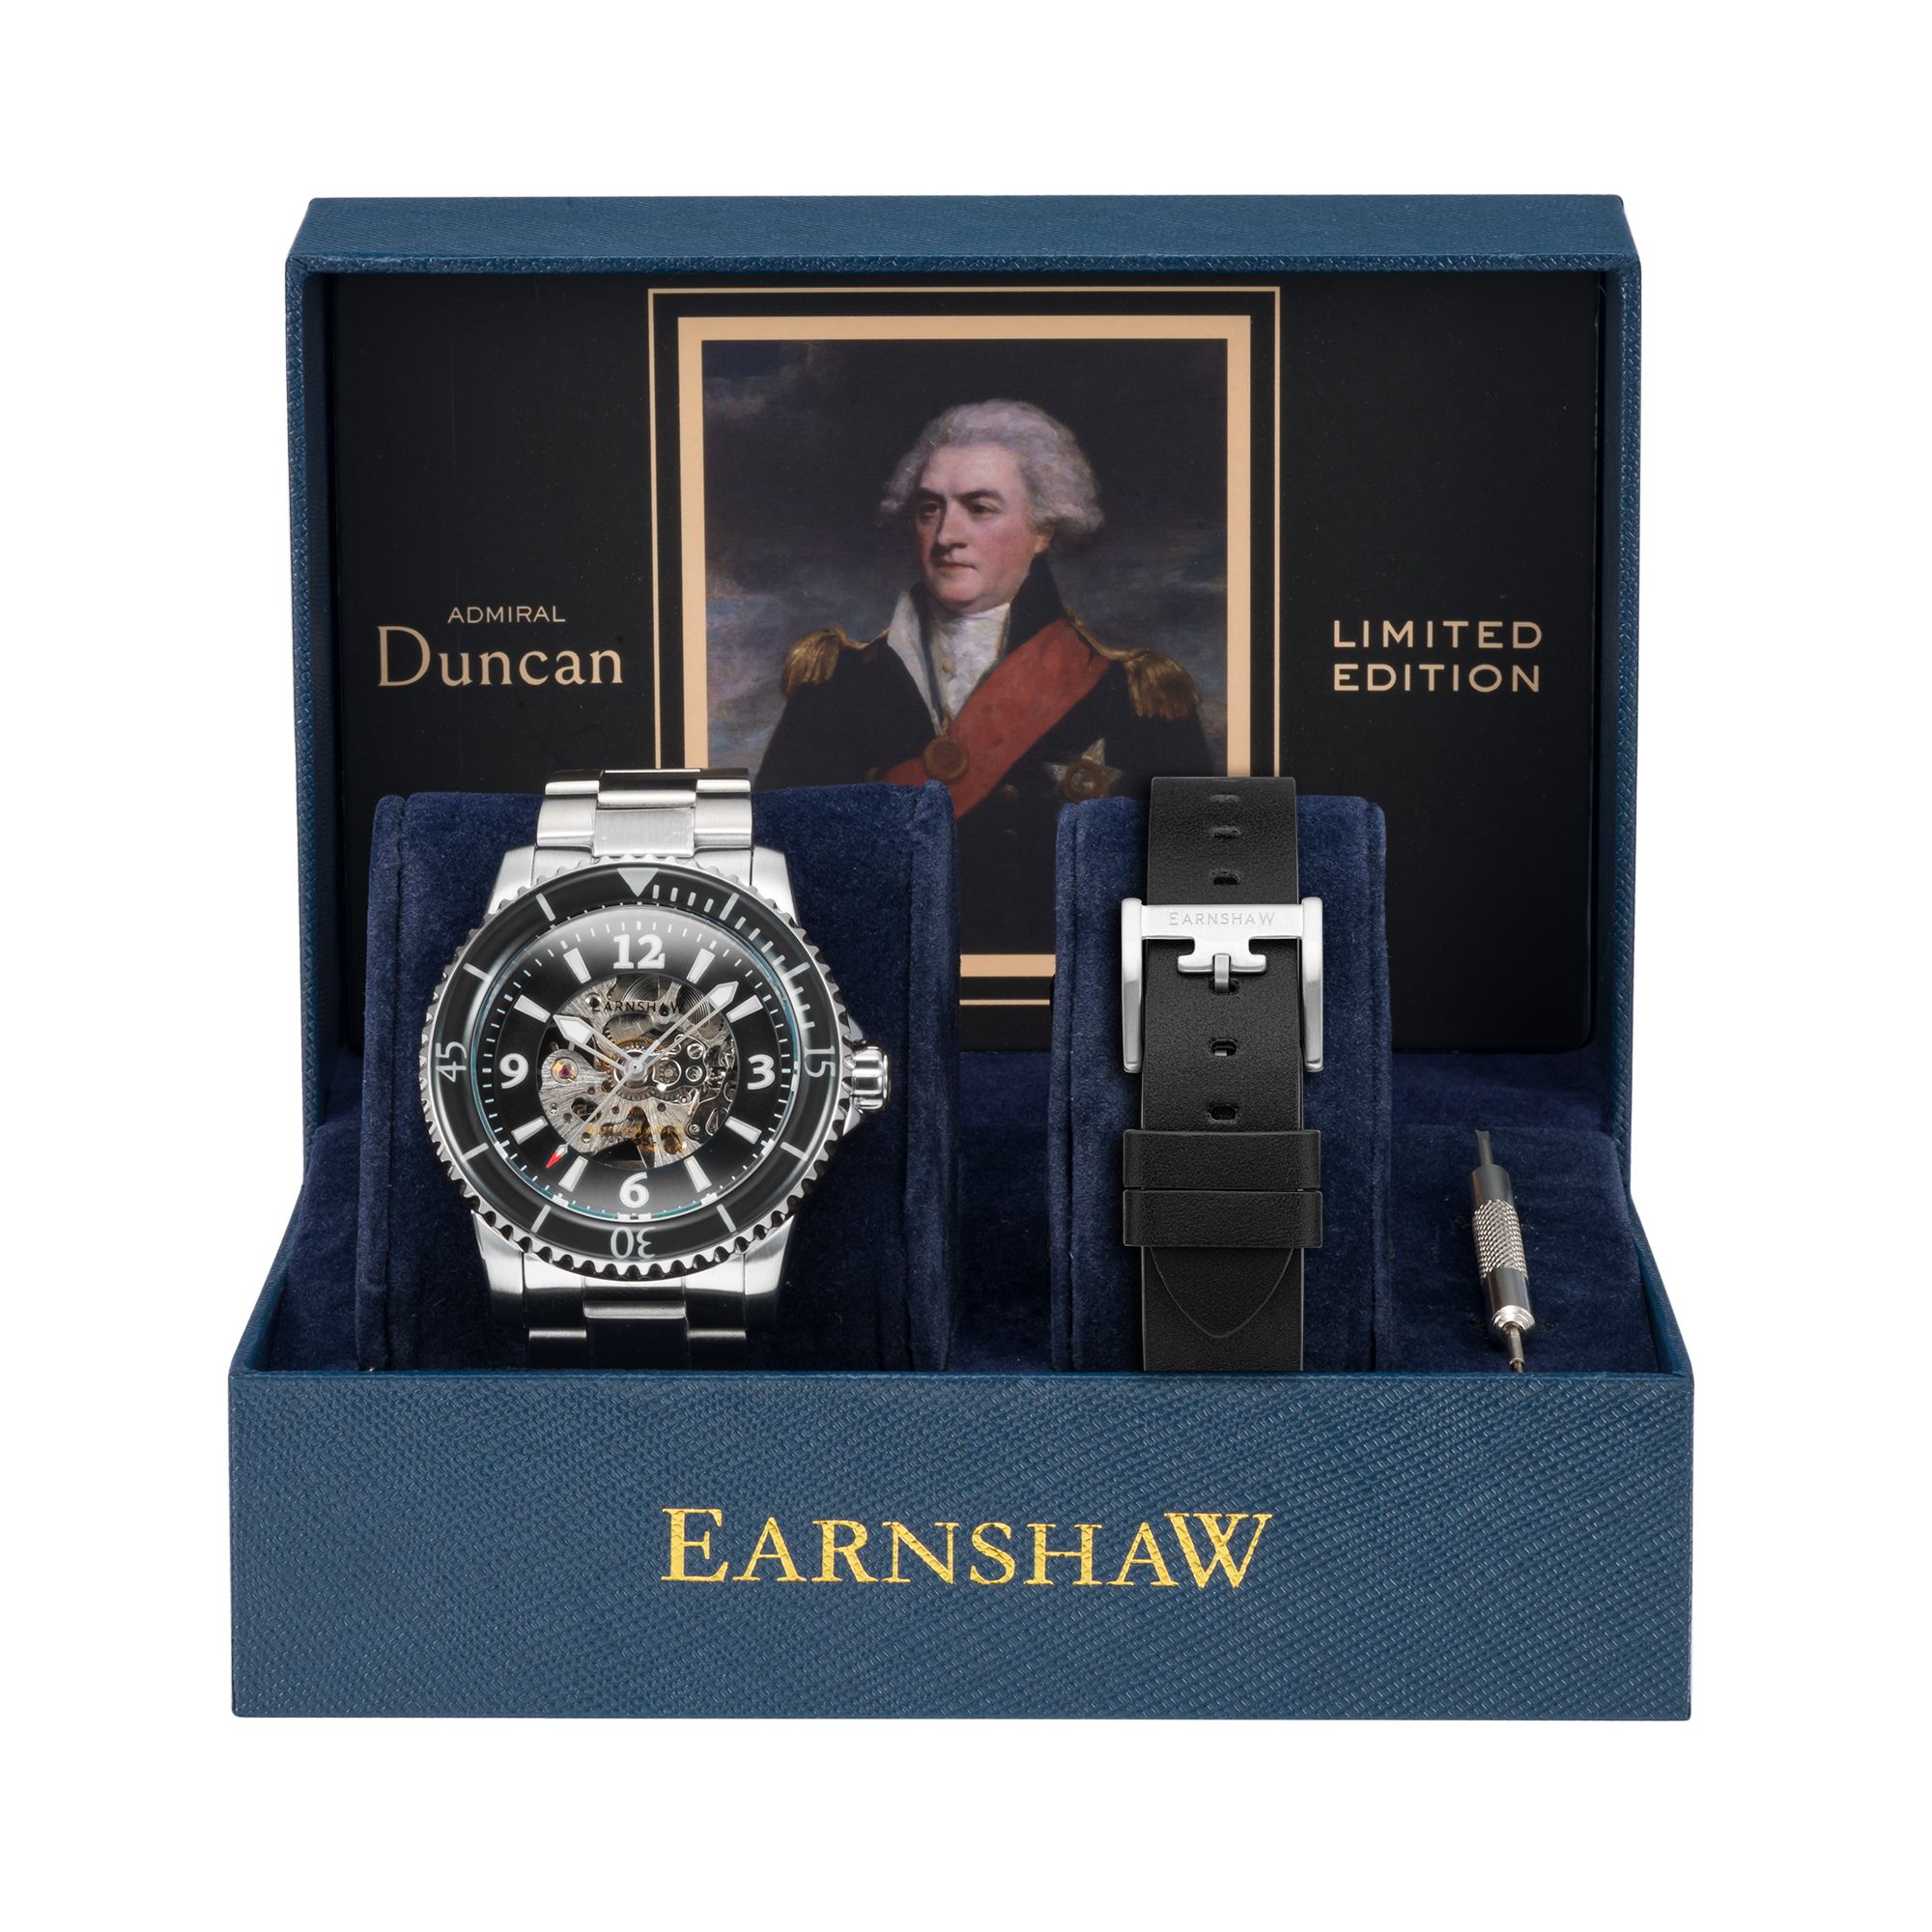 Thomas Earnshaw 43mm Men's Automatic Watch ADMIRAL LIMITED EDITION ES-8129-11 - Click Image to Close